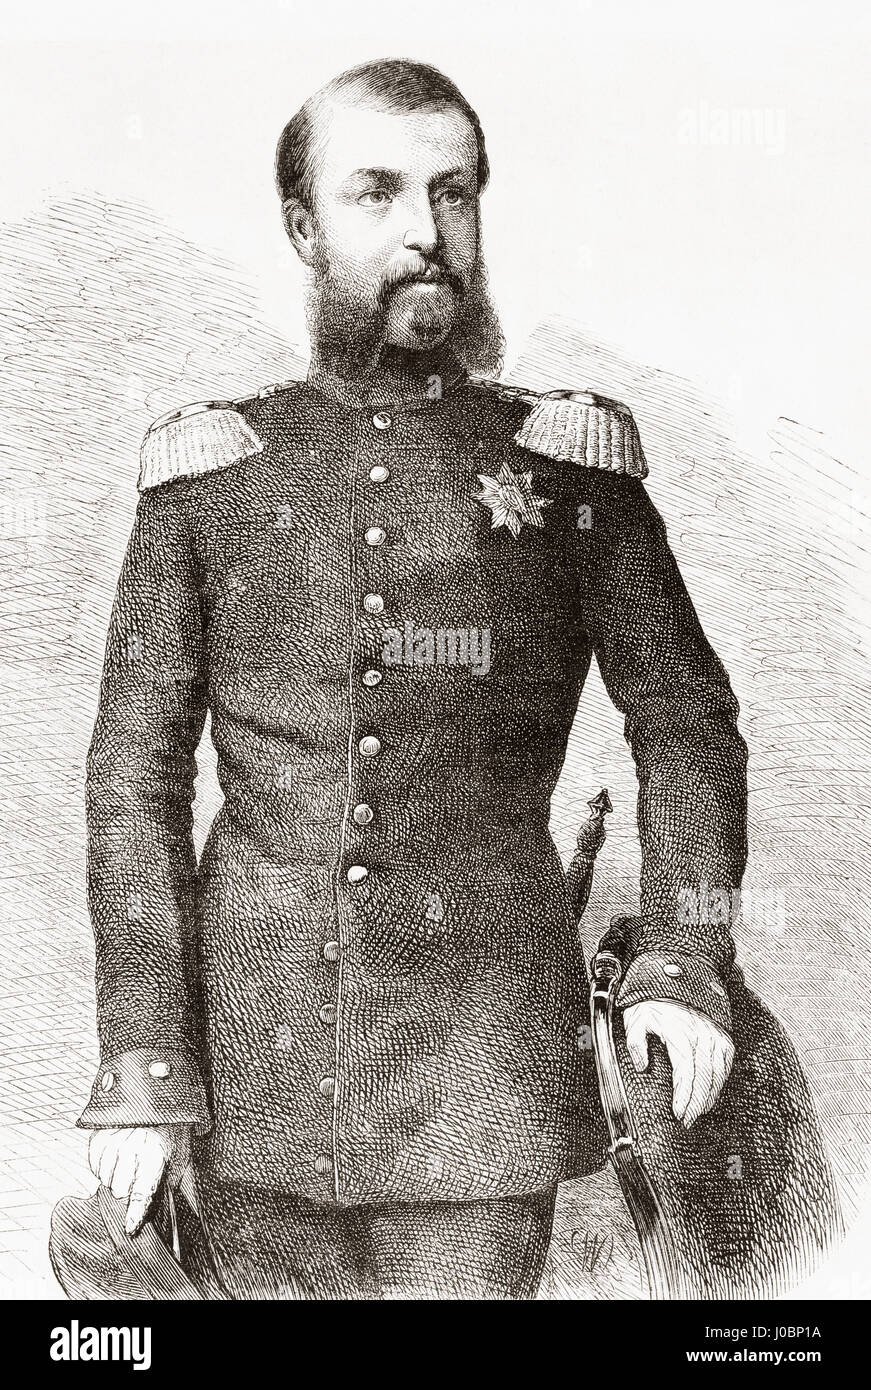 Duke Paul Frederick of Mecklenburg, 1852 – 1923.  Member of the House of Mecklenburg-Schwerin and general of the Mecklenburg cavalry.   From L'Univers Illustre published 1867. Stock Photo